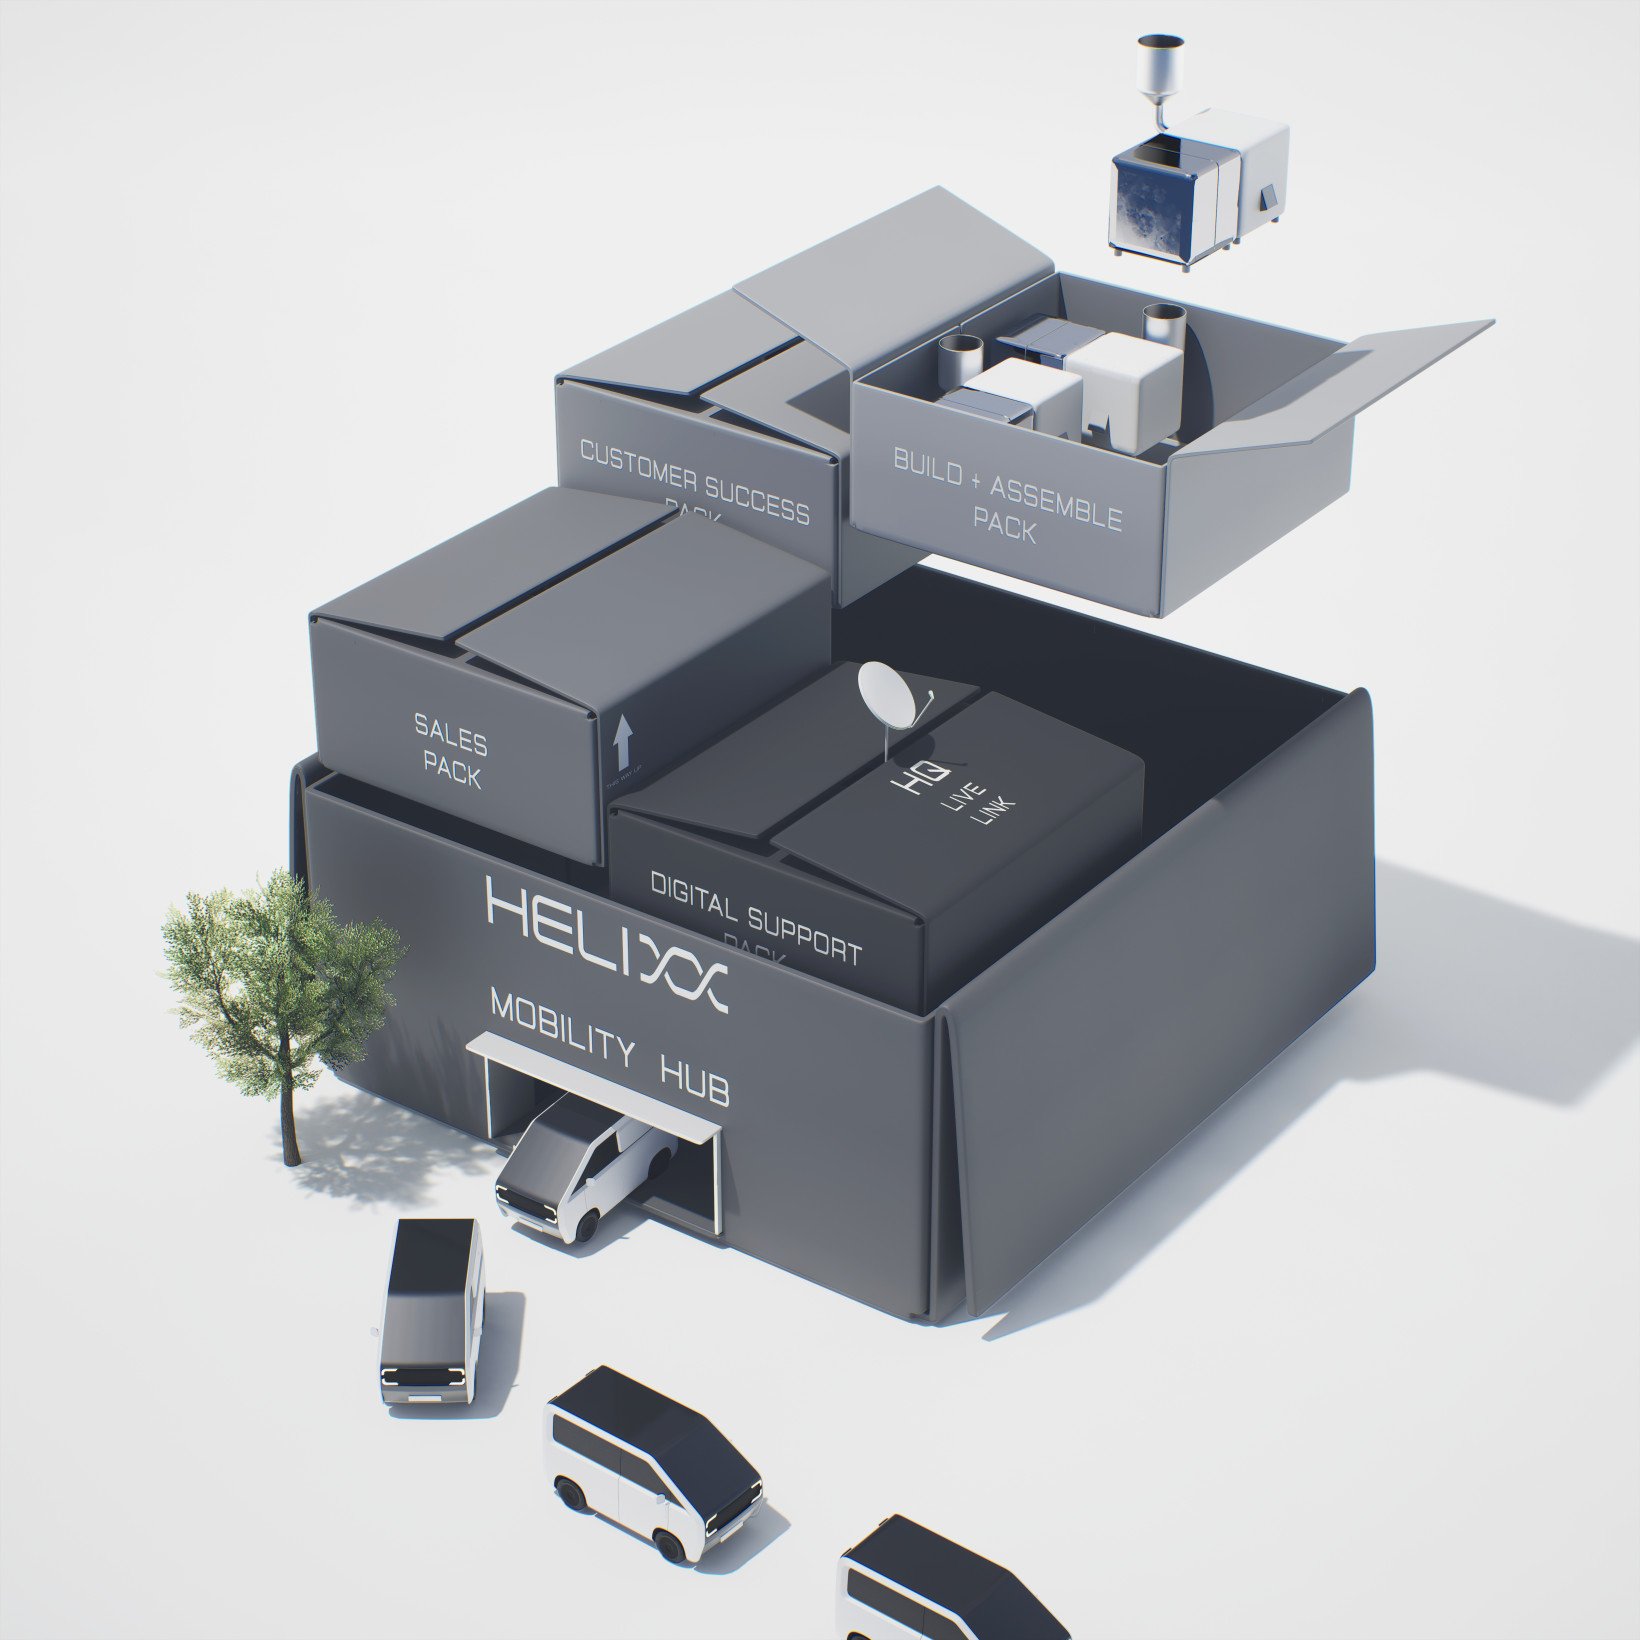 The Helixx mobility hub model, showing the different elements of the ecosystem.